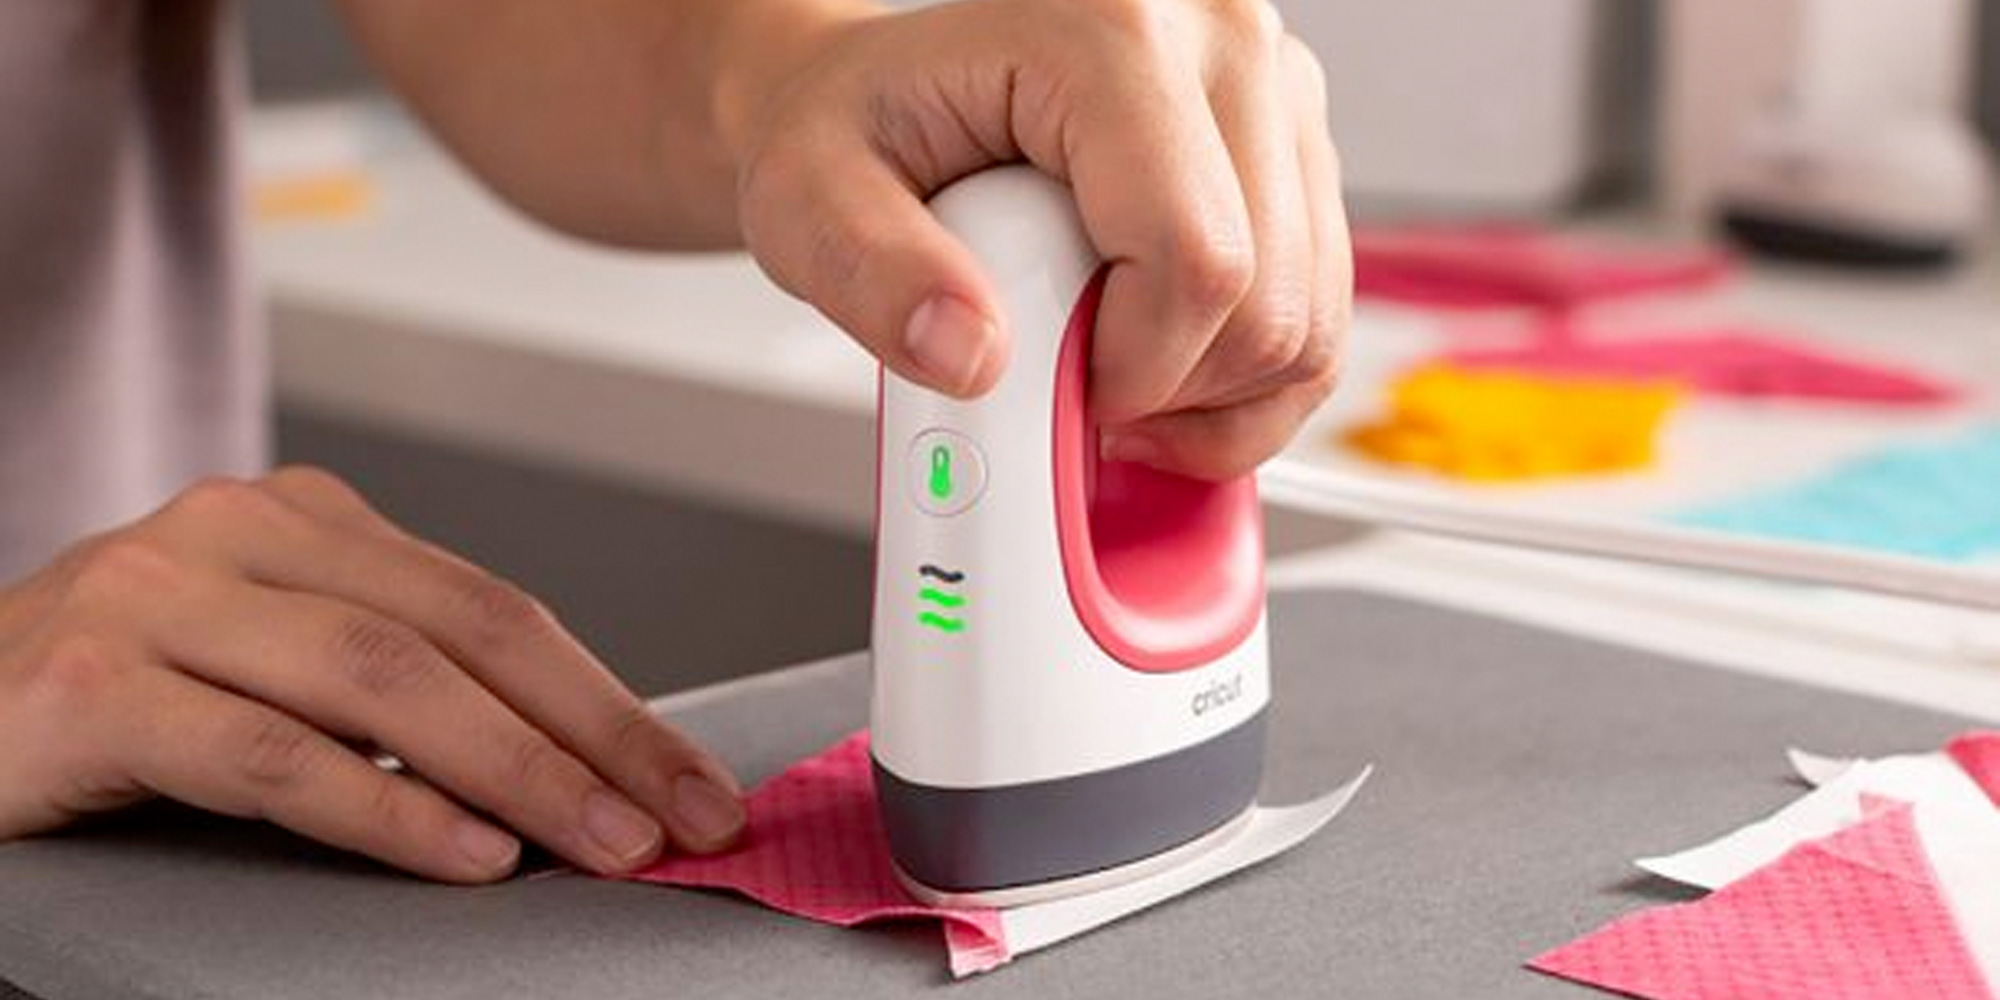 Add Cricut's EasyPress Mini Heat Press to your crafting toolkit at the  second-best price of $39